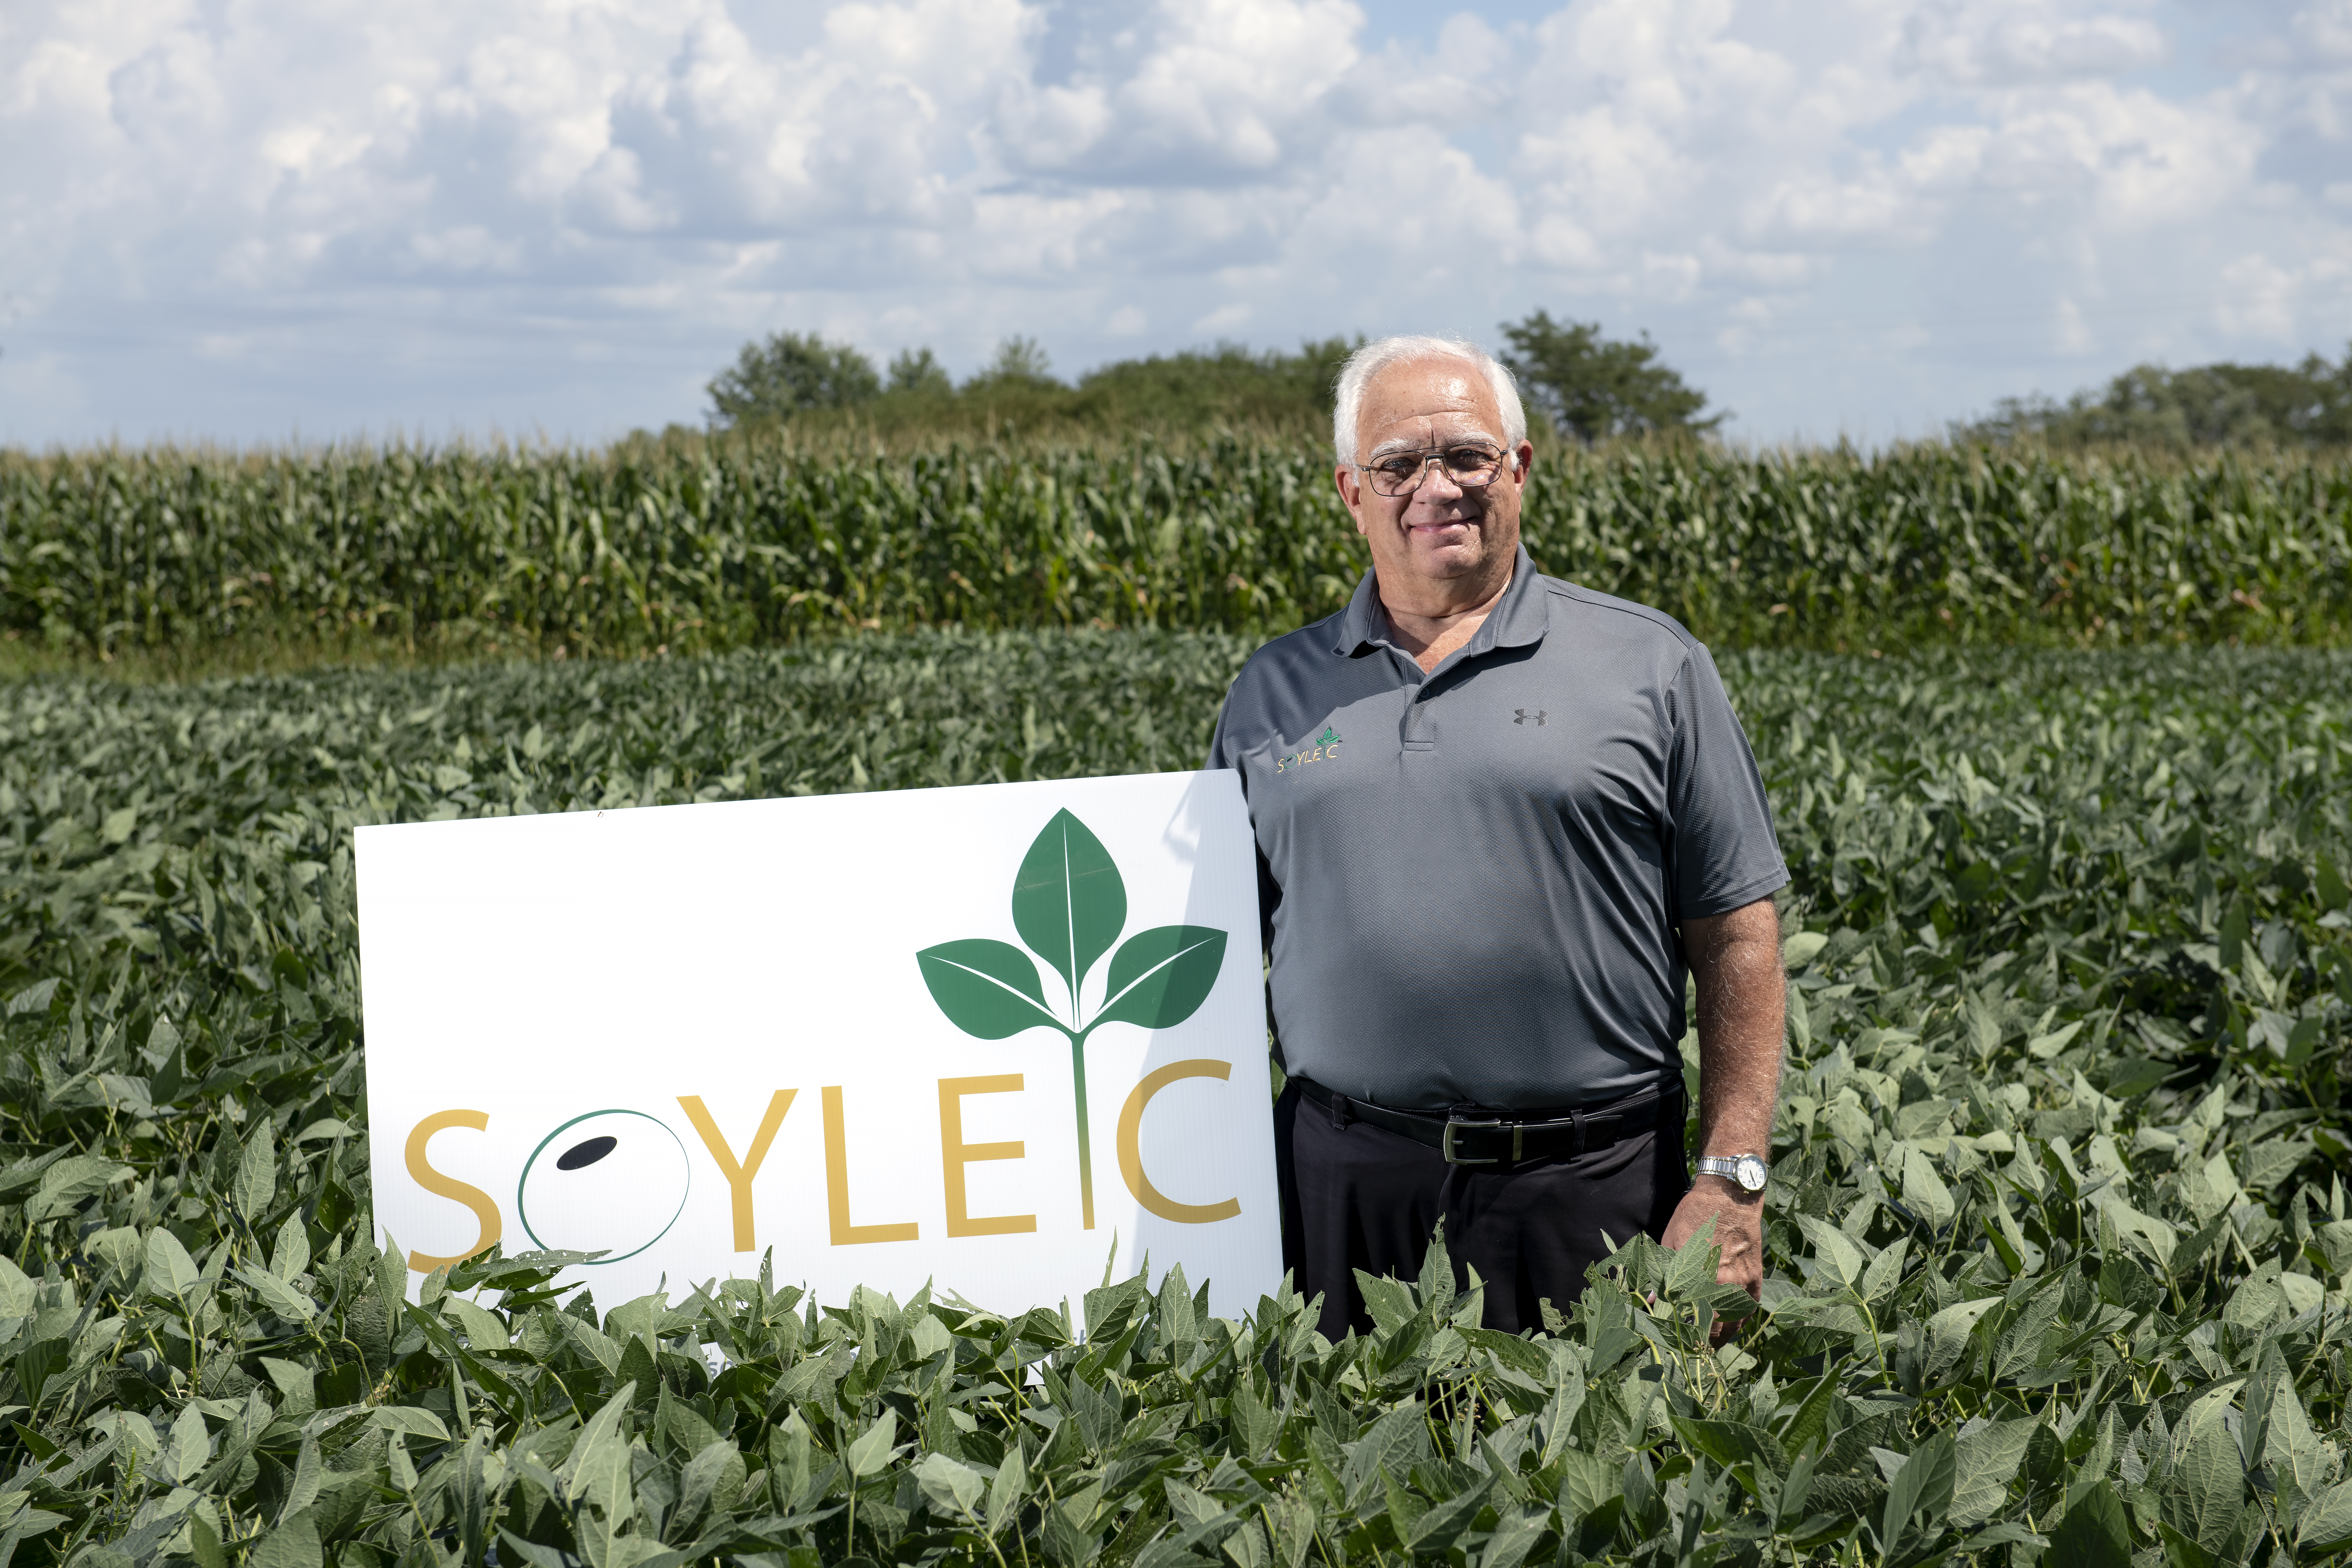 Tony Stafford standing next to a Soyleic sign in a field